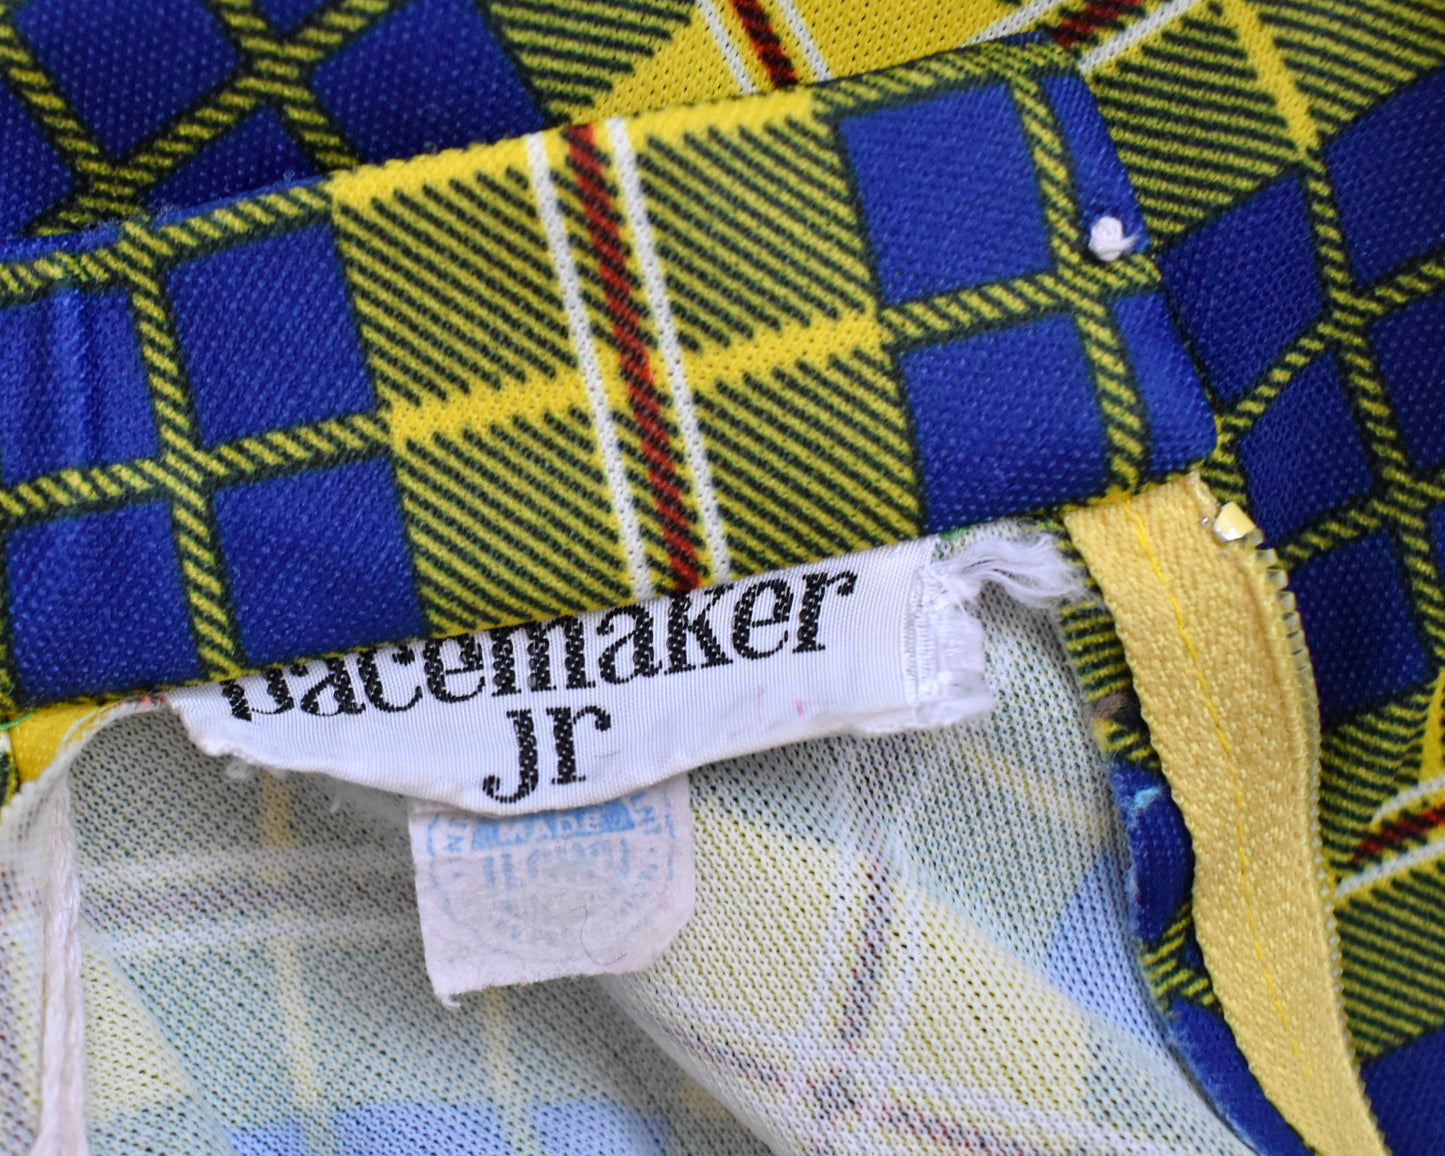 close up of the tag which says pacemaker jr